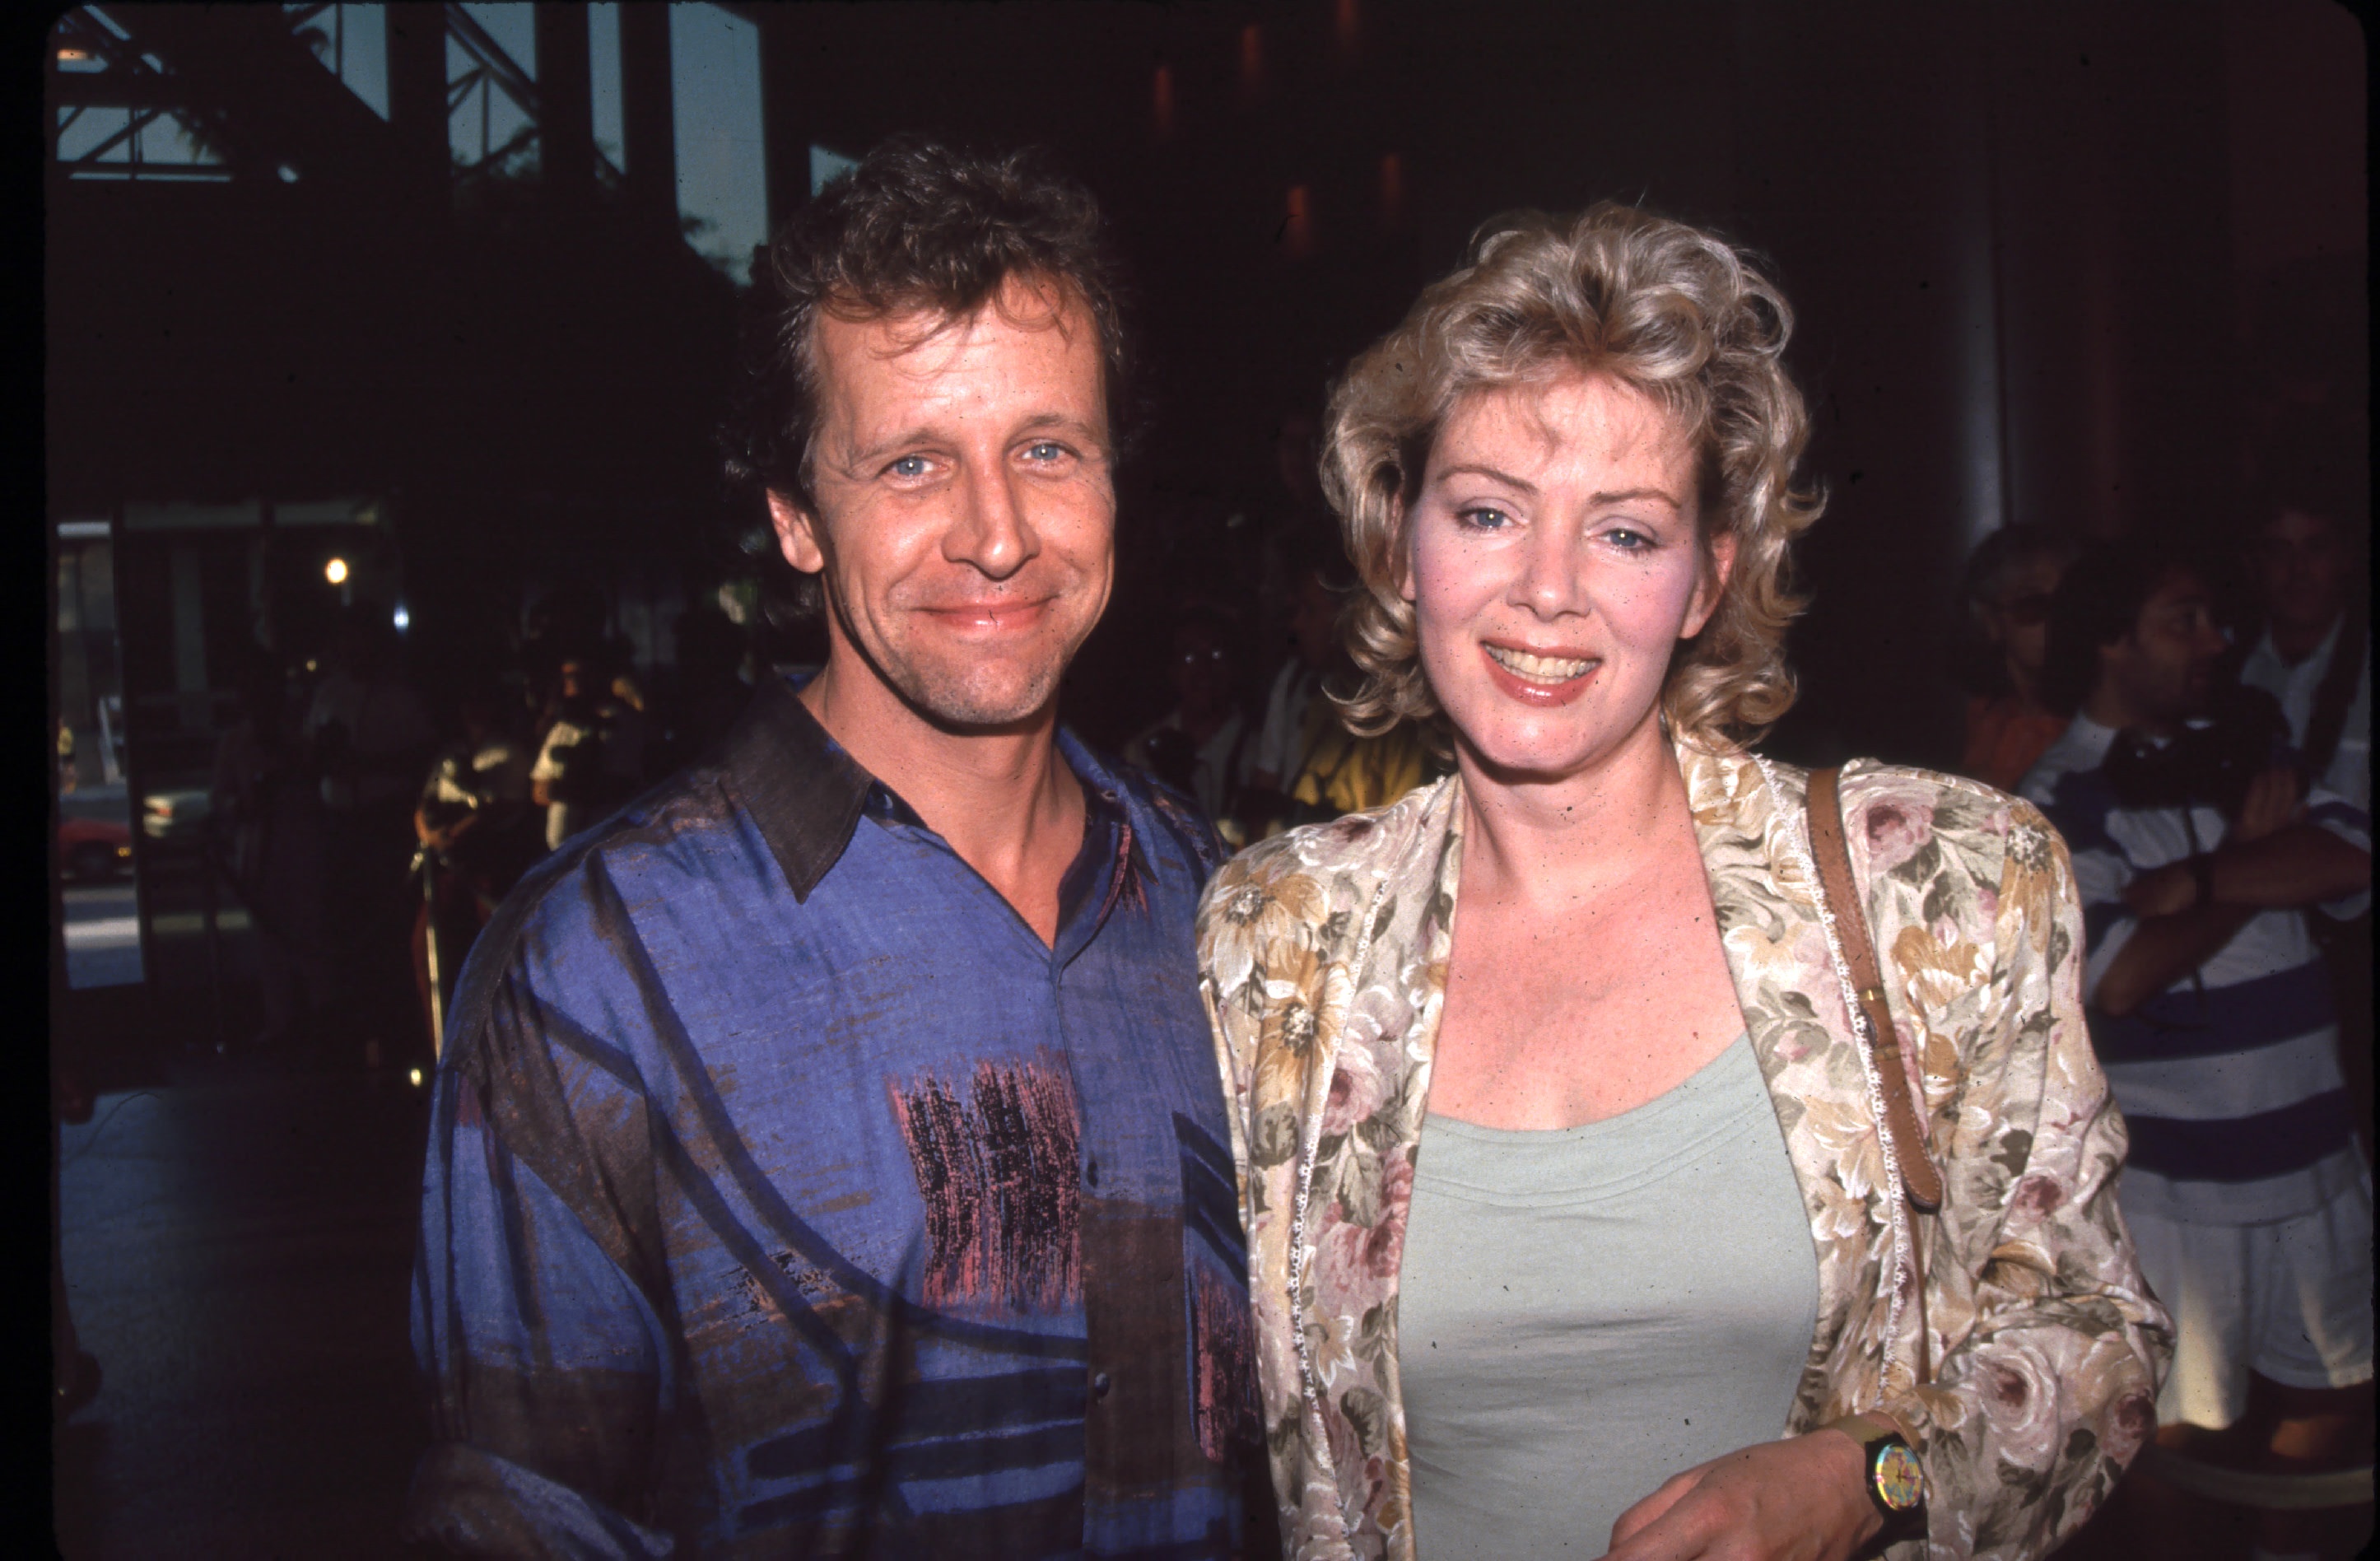 <p><span>On March 18, 2021, actor Richard Gilliland passed away, leaving behind his wife of nearly 34 years, "Designing Women" co-star Jean Smart. "He was a great dad, and he made me laugh every day," the "Hacks" actress told Variety months after Richard's sudden death from a heart condition. "Him passing away was just not ever even a thought. And it's changed every moment of my everyday life; every atom of my existence I feel like is altered."</span></p><p>MORE: <a href="https://www.wonderwall.com/celebrity/photos/stars-we-lost-in-2024-842858.gallery">Stars who died in 2024</a></p>